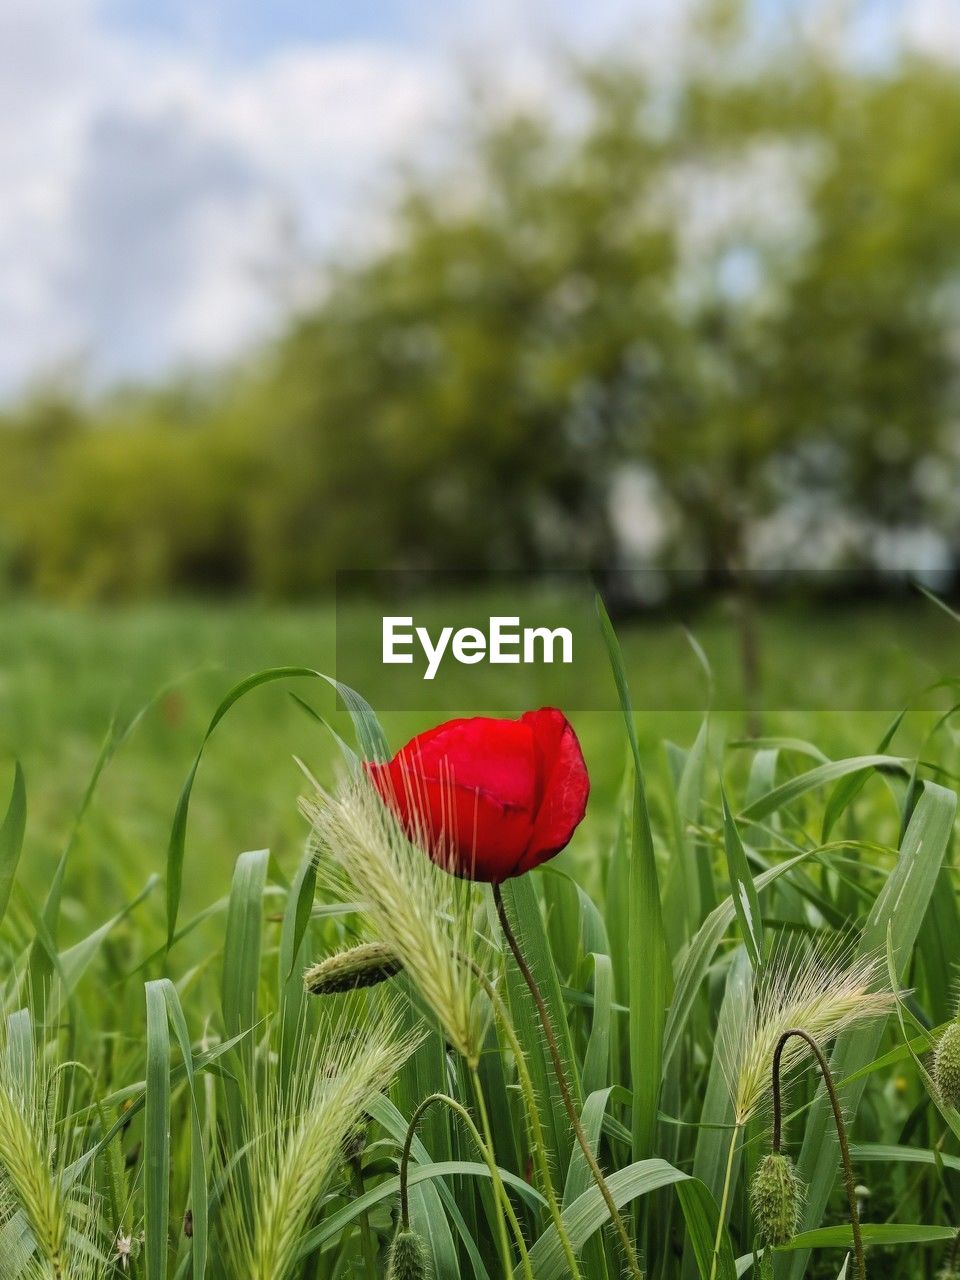 plant, grass, field, green, meadow, flower, nature, red, beauty in nature, growth, grassland, flowering plant, lawn, land, no people, sky, focus on foreground, day, freshness, poppy, prairie, close-up, landscape, outdoors, pasture, rural area, environment, springtime, rural scene, cloud, leaf, fragility, wildflower, selective focus, tranquility